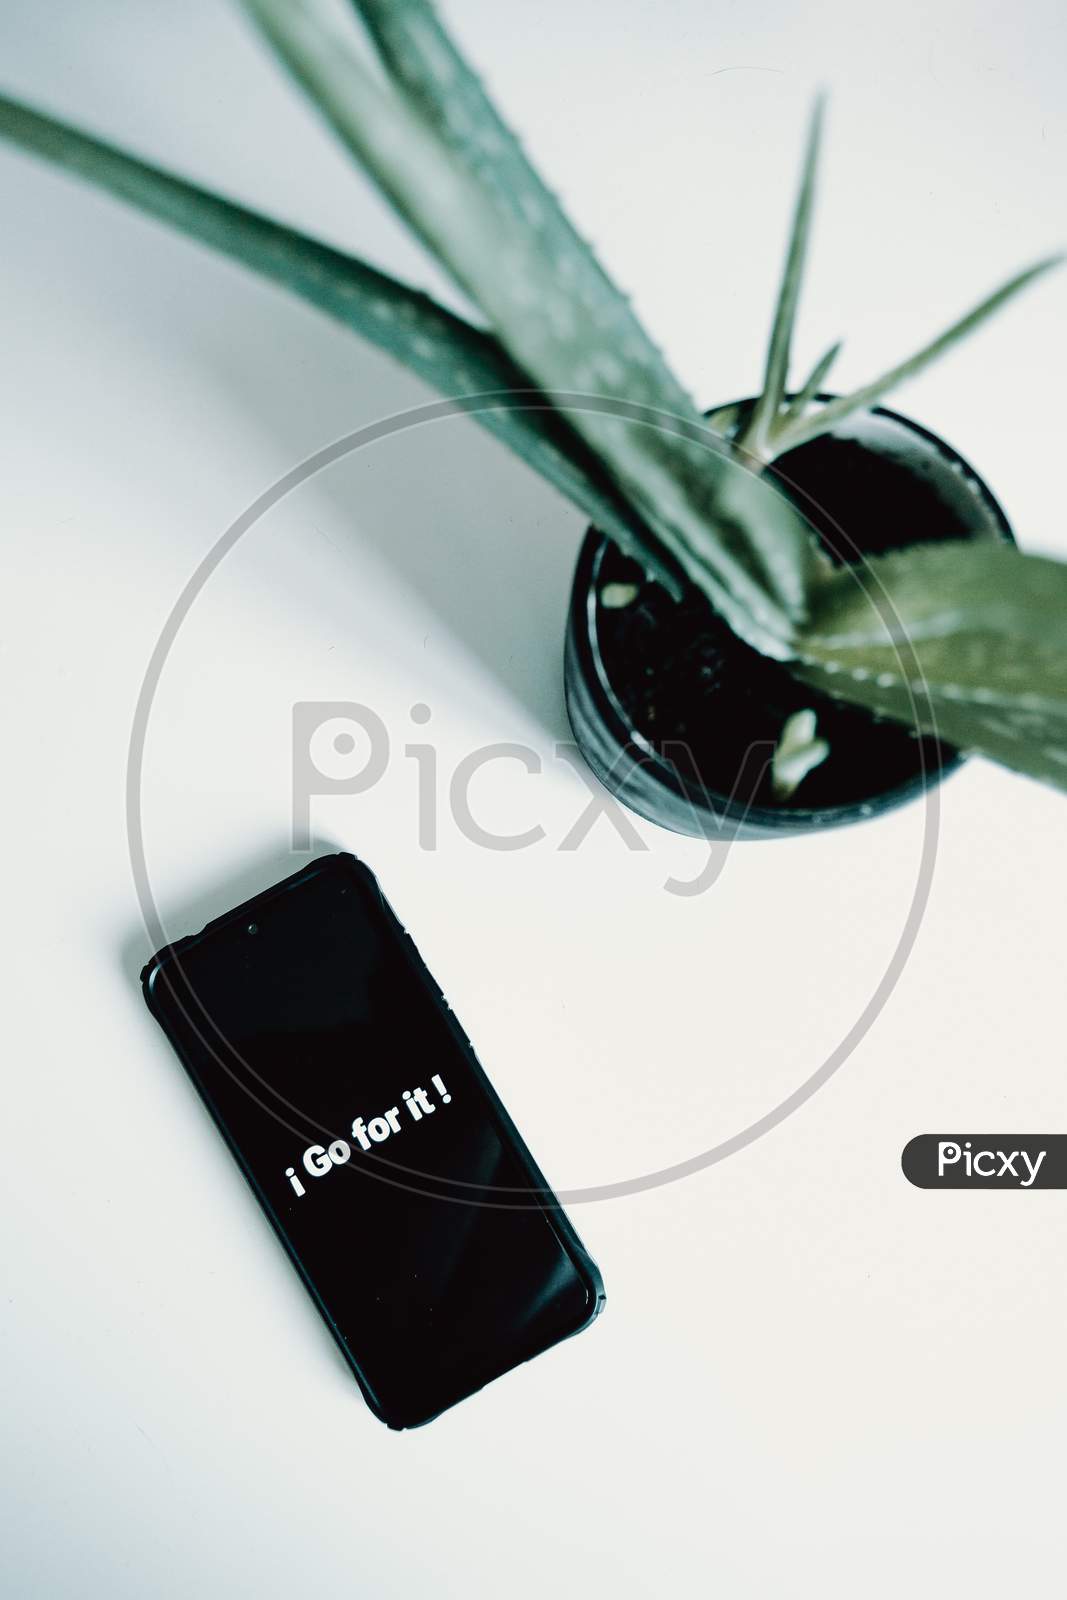 Flat Lay Of A Black Phone Over A White Background And A Plant With A Inspirational Phrase Written In It